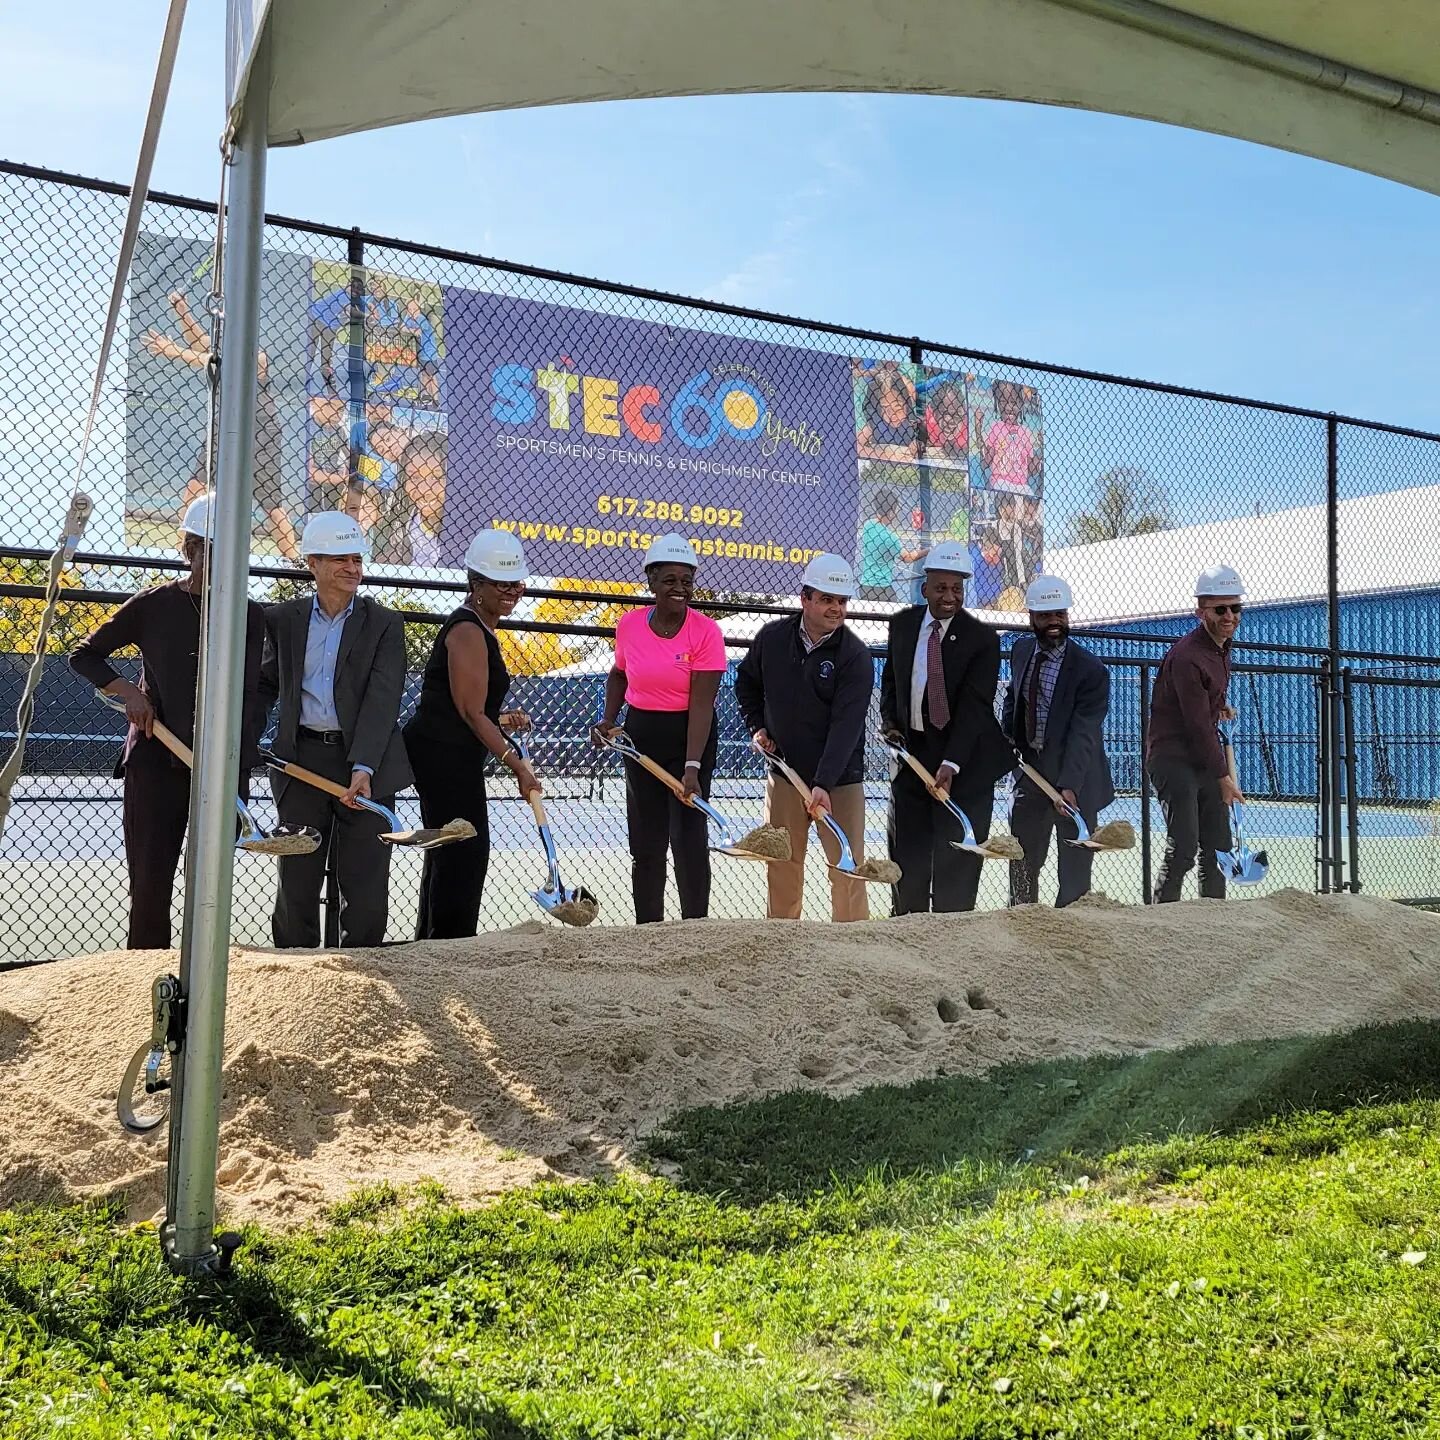 Congratulations to @stectennis for a great groundbreaking on your facilities expansion project! We couldn't be more excited to get to work on a 188 kW low-income community shared solar project at this incredible community institution